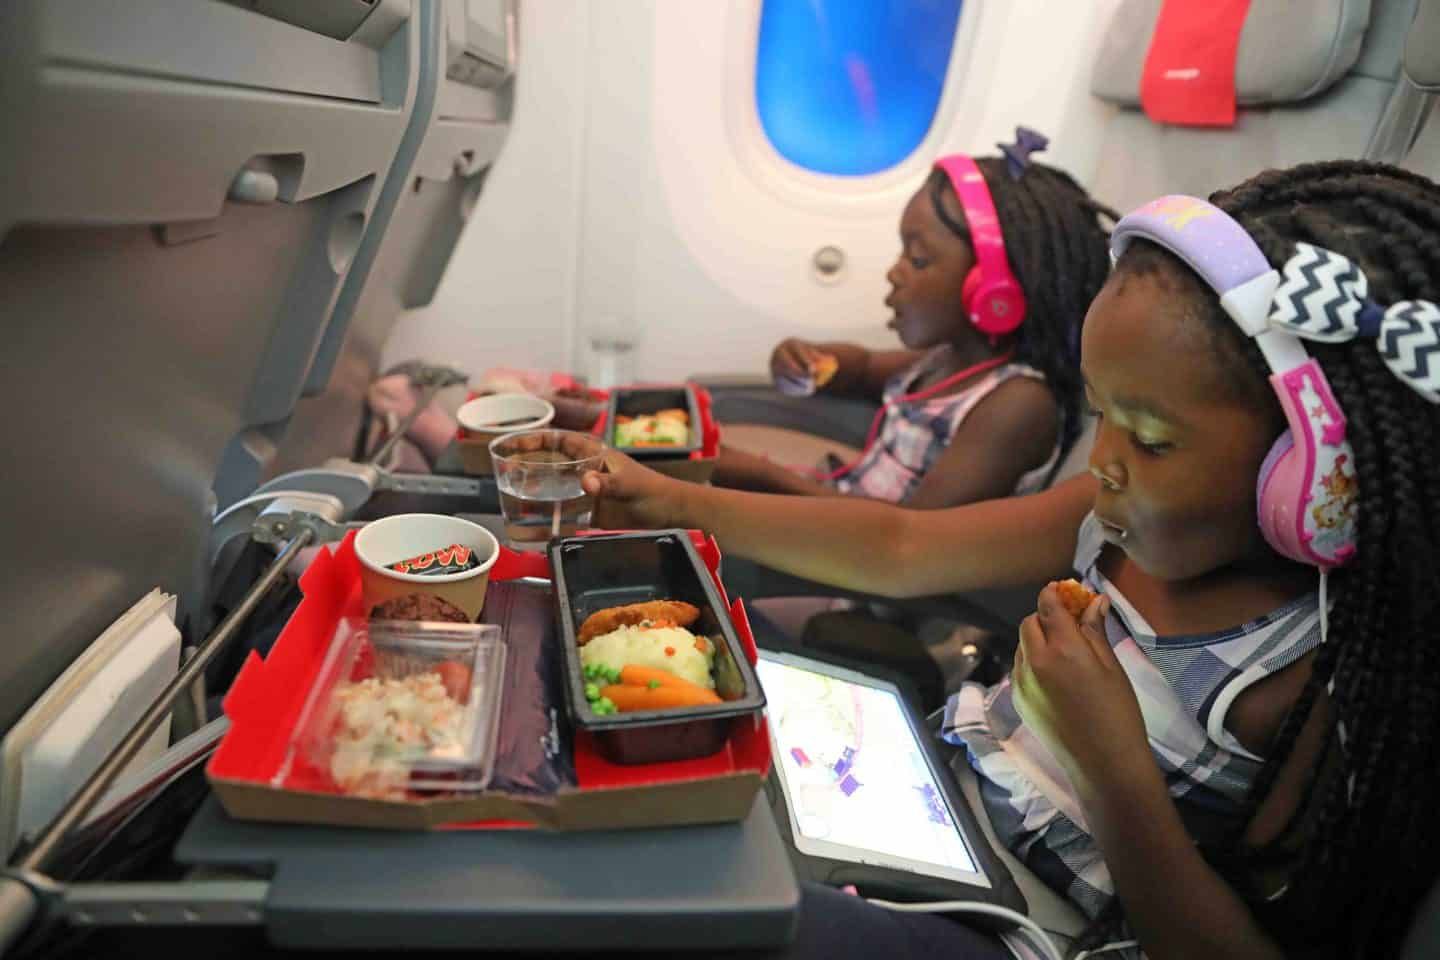 Two girls watching tablets while eating airplane food